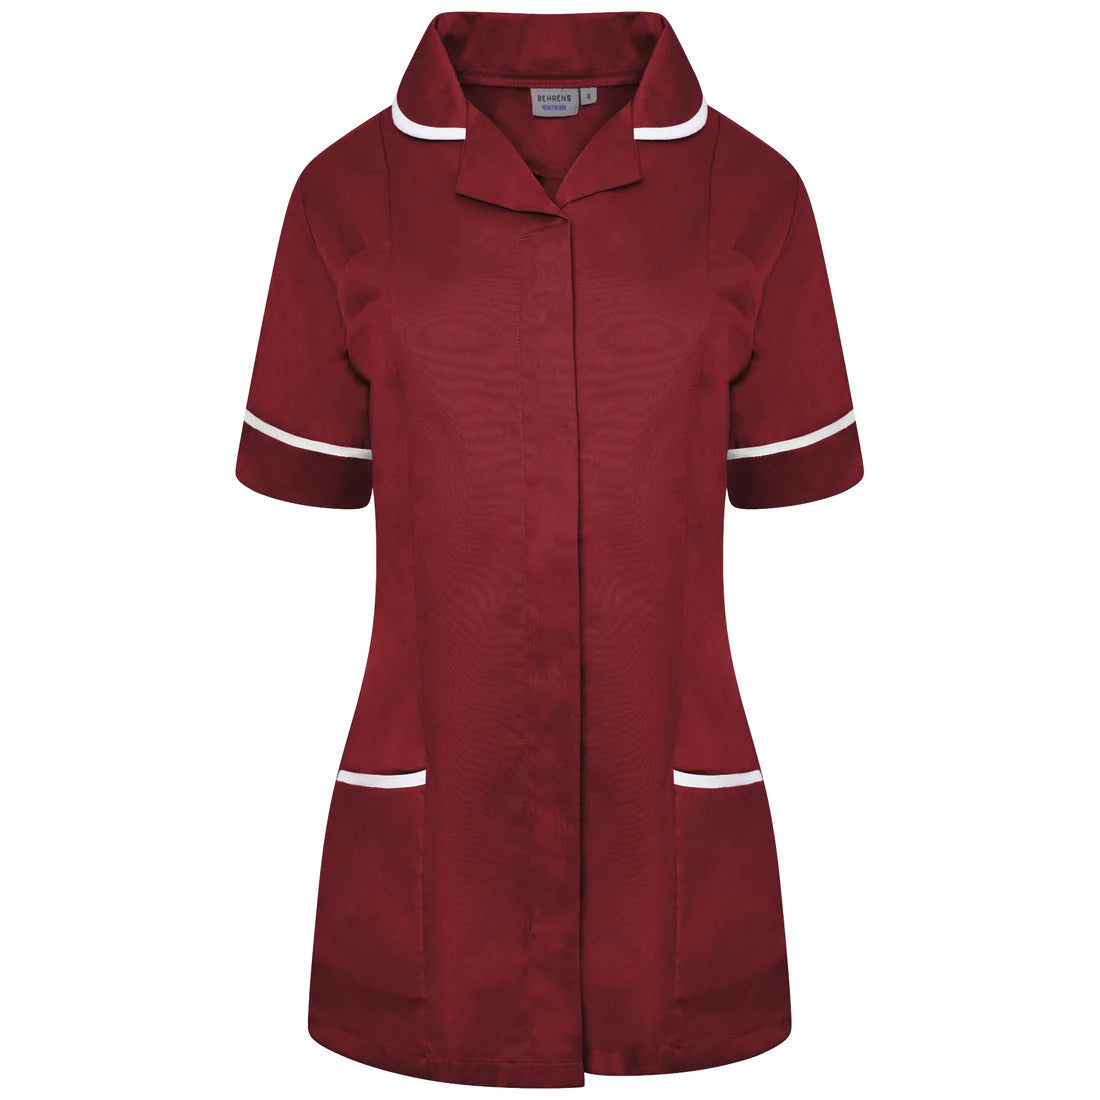 Maroon/White Contrast Ladies Tunic with Round Collar - NCLTPS